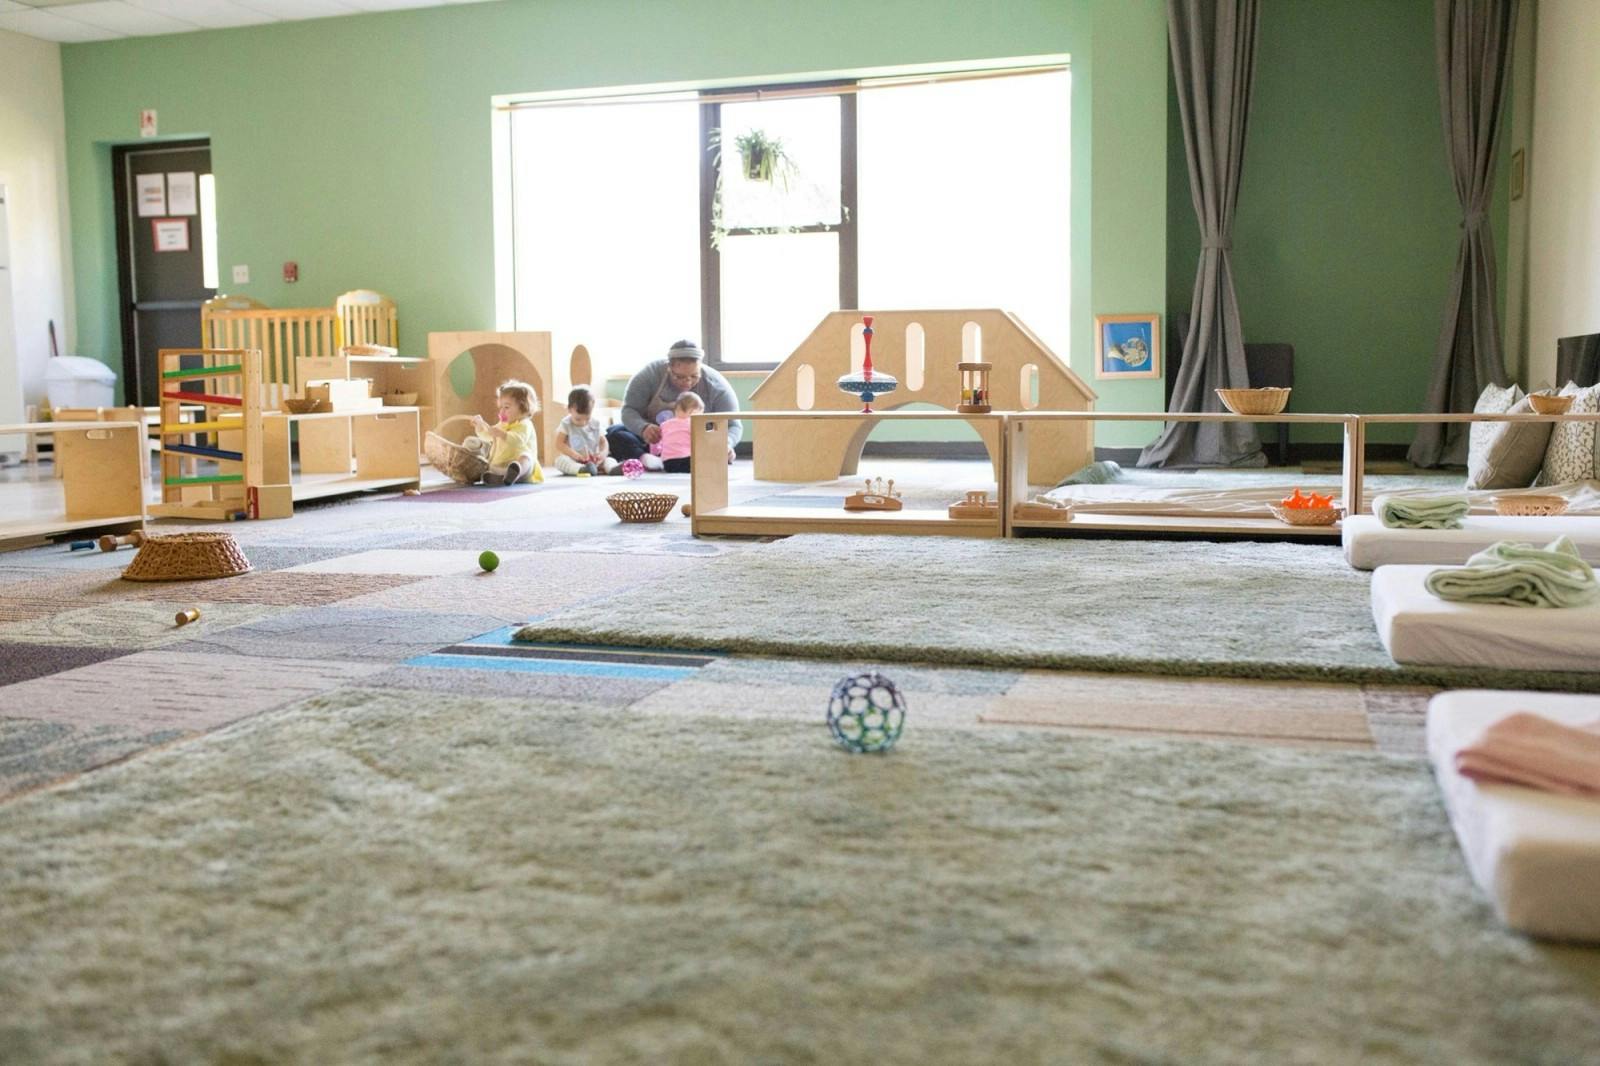 Movement is encouraged in this preschool space. 